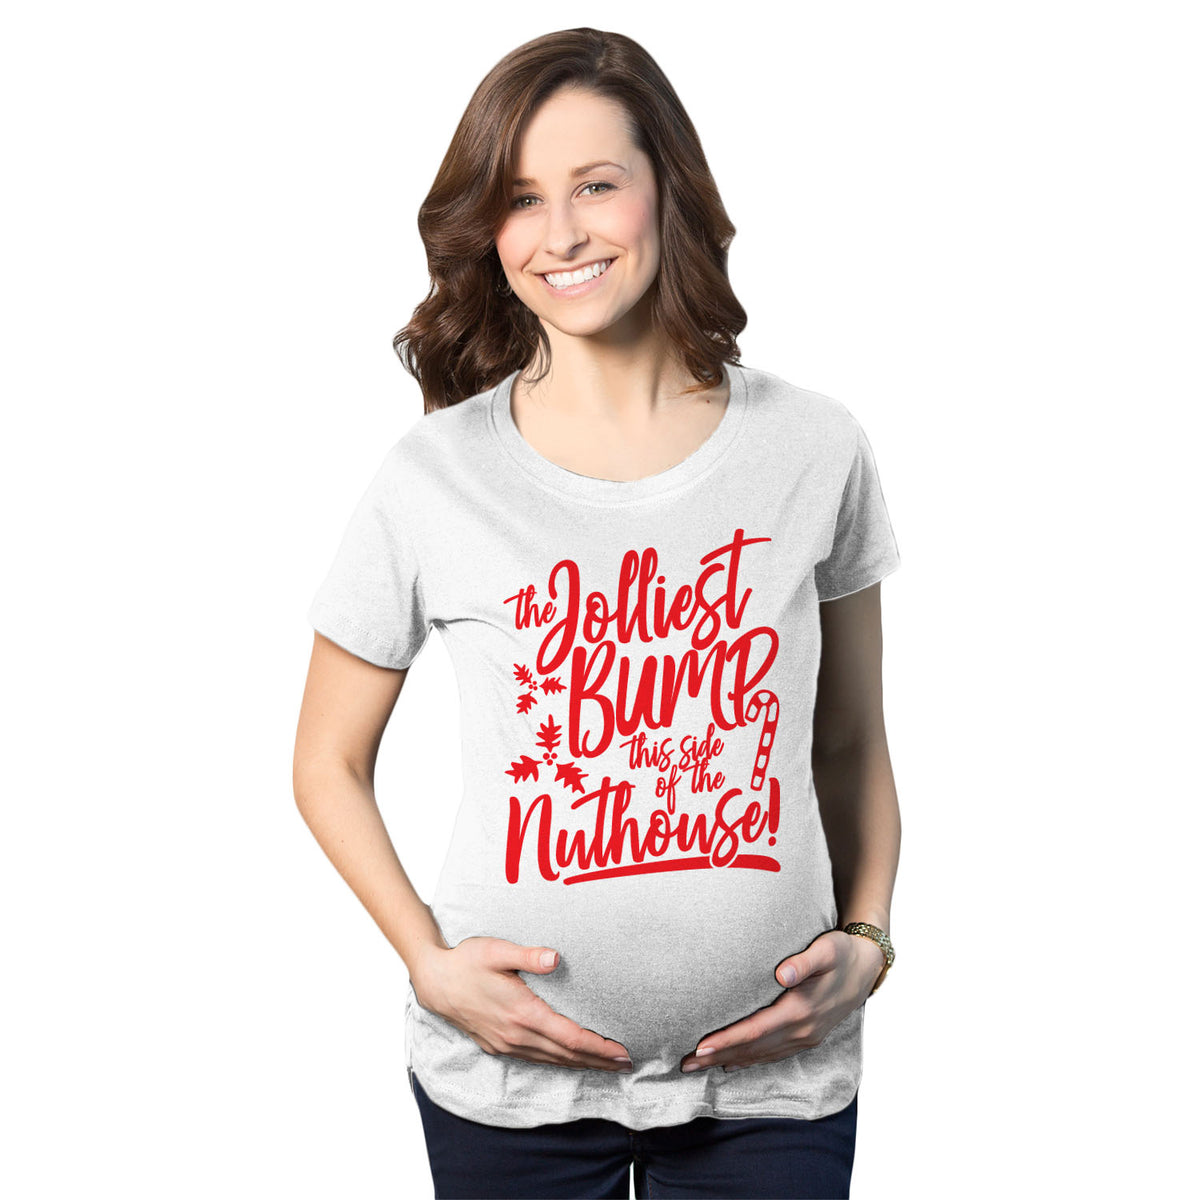 Funny White The Jolliest Bump This Side Of The Nuthouse Maternity T Shirt Nerdy Christmas TV &amp; Movies Tee